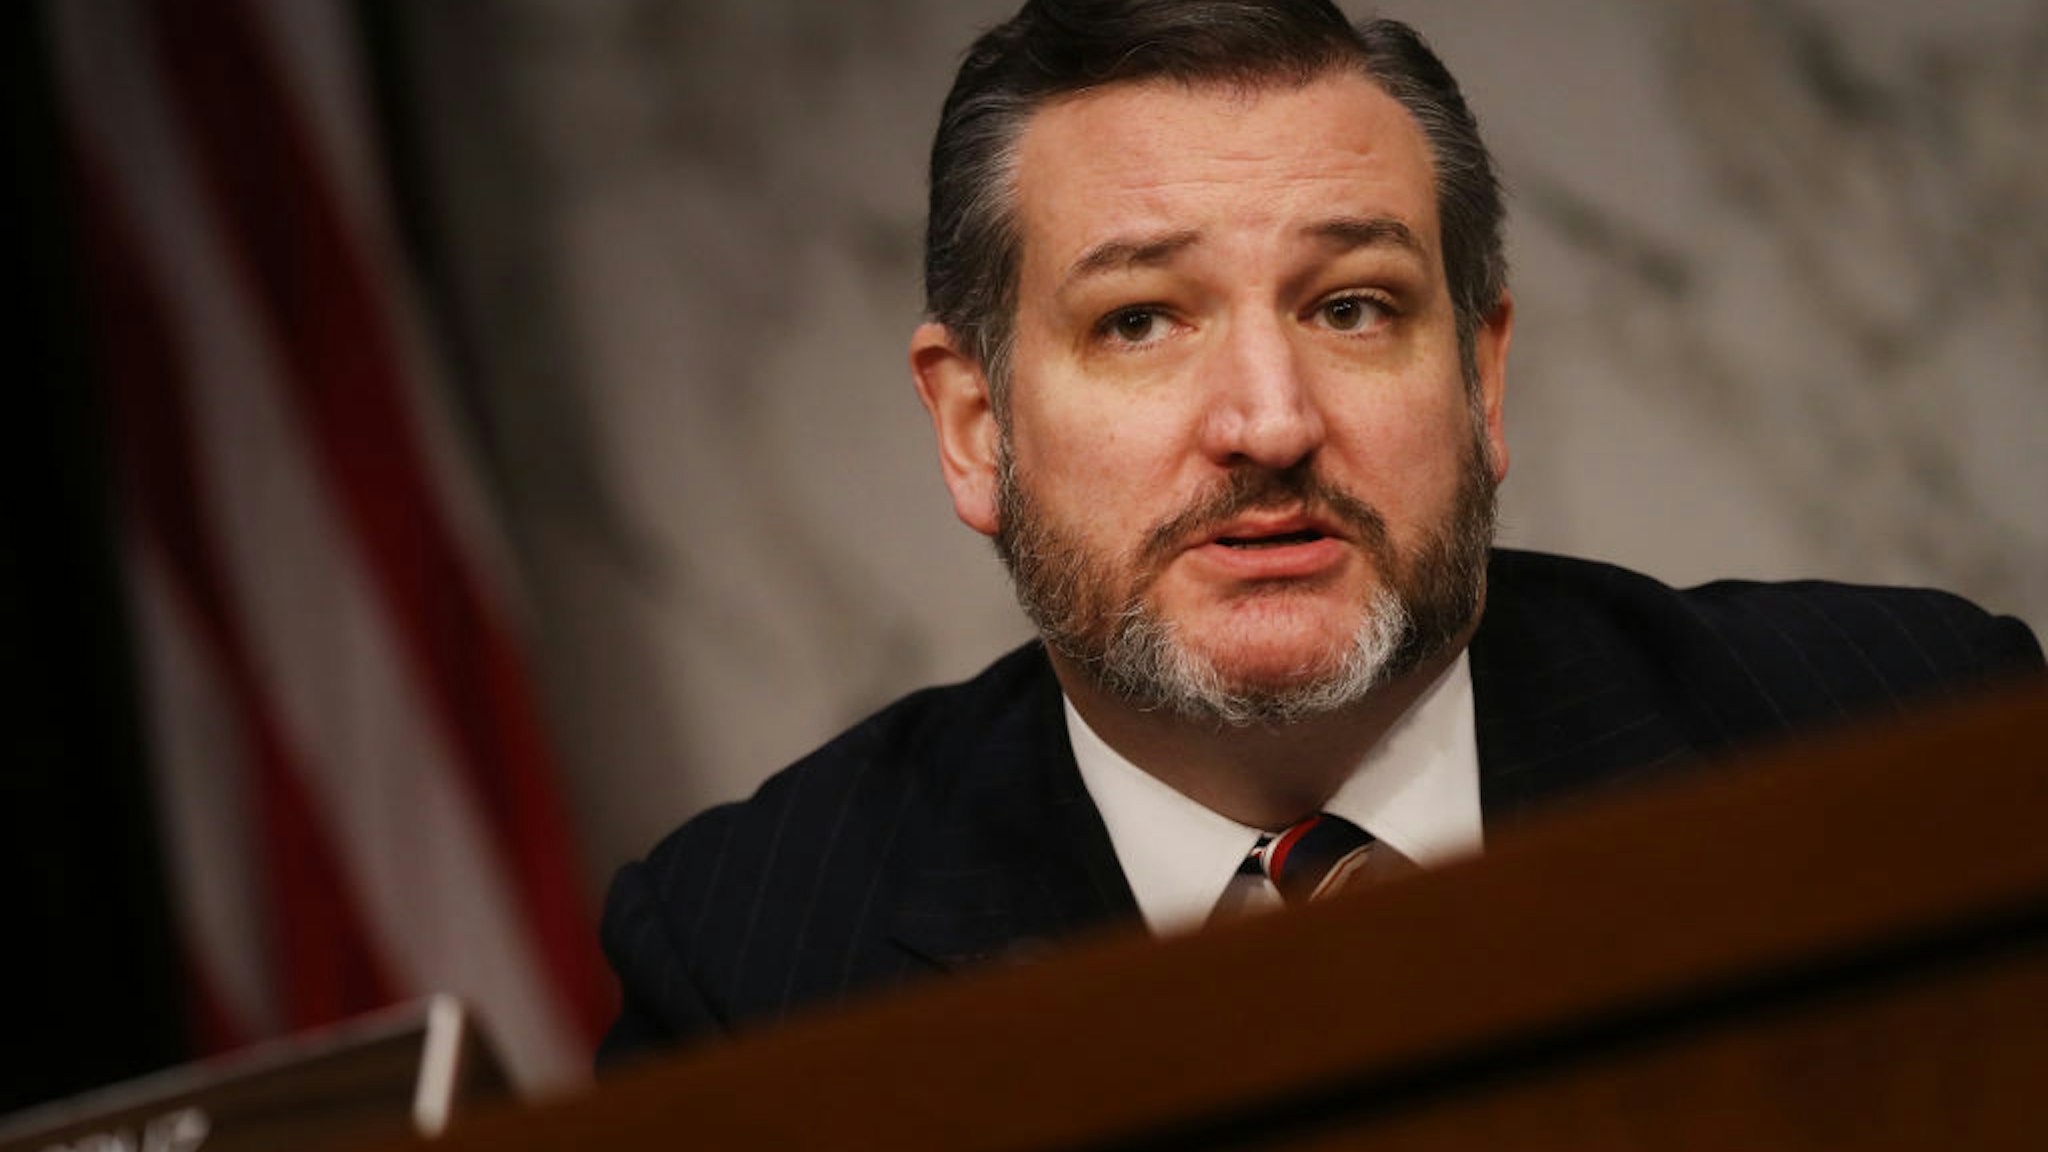 Senator Ted Cruz, a Republican from Texas, speaks during a Senate Judiciary Committee confirmation hearing for William Barr, attorney general nominee for U.S. President Donald Trump, not pictured, in Washington, D.C., U.S., on Tuesday, Jan. 15, 2019. Barr says he'd let Special Counsel Robert Mueller "complete his work" and that he'd provide Congress and the public as much of the findings in the Russia probe as possible.